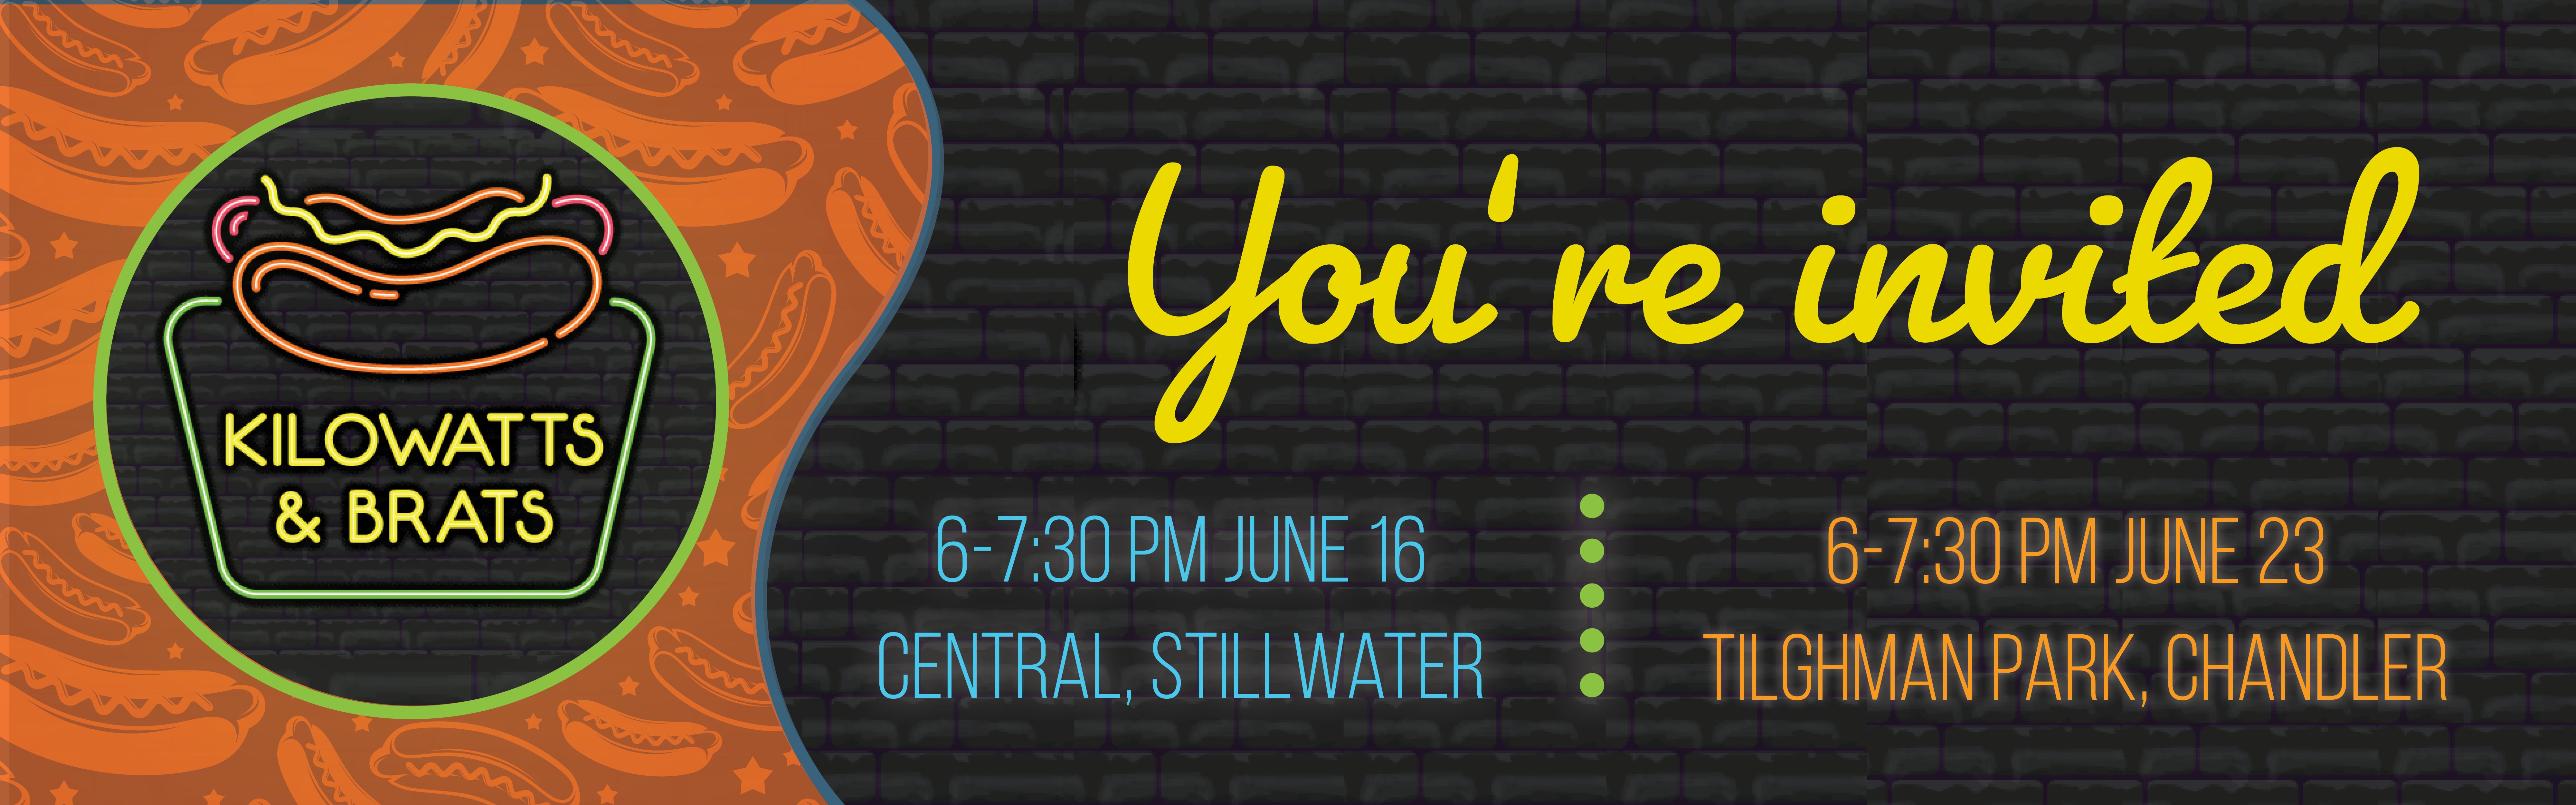 You're invited to Kilowatts and Brats! Jine 16 at Central in Stillwater, June 23 at Tilghman Park in Chandler from 6 to 7:30 p.m.